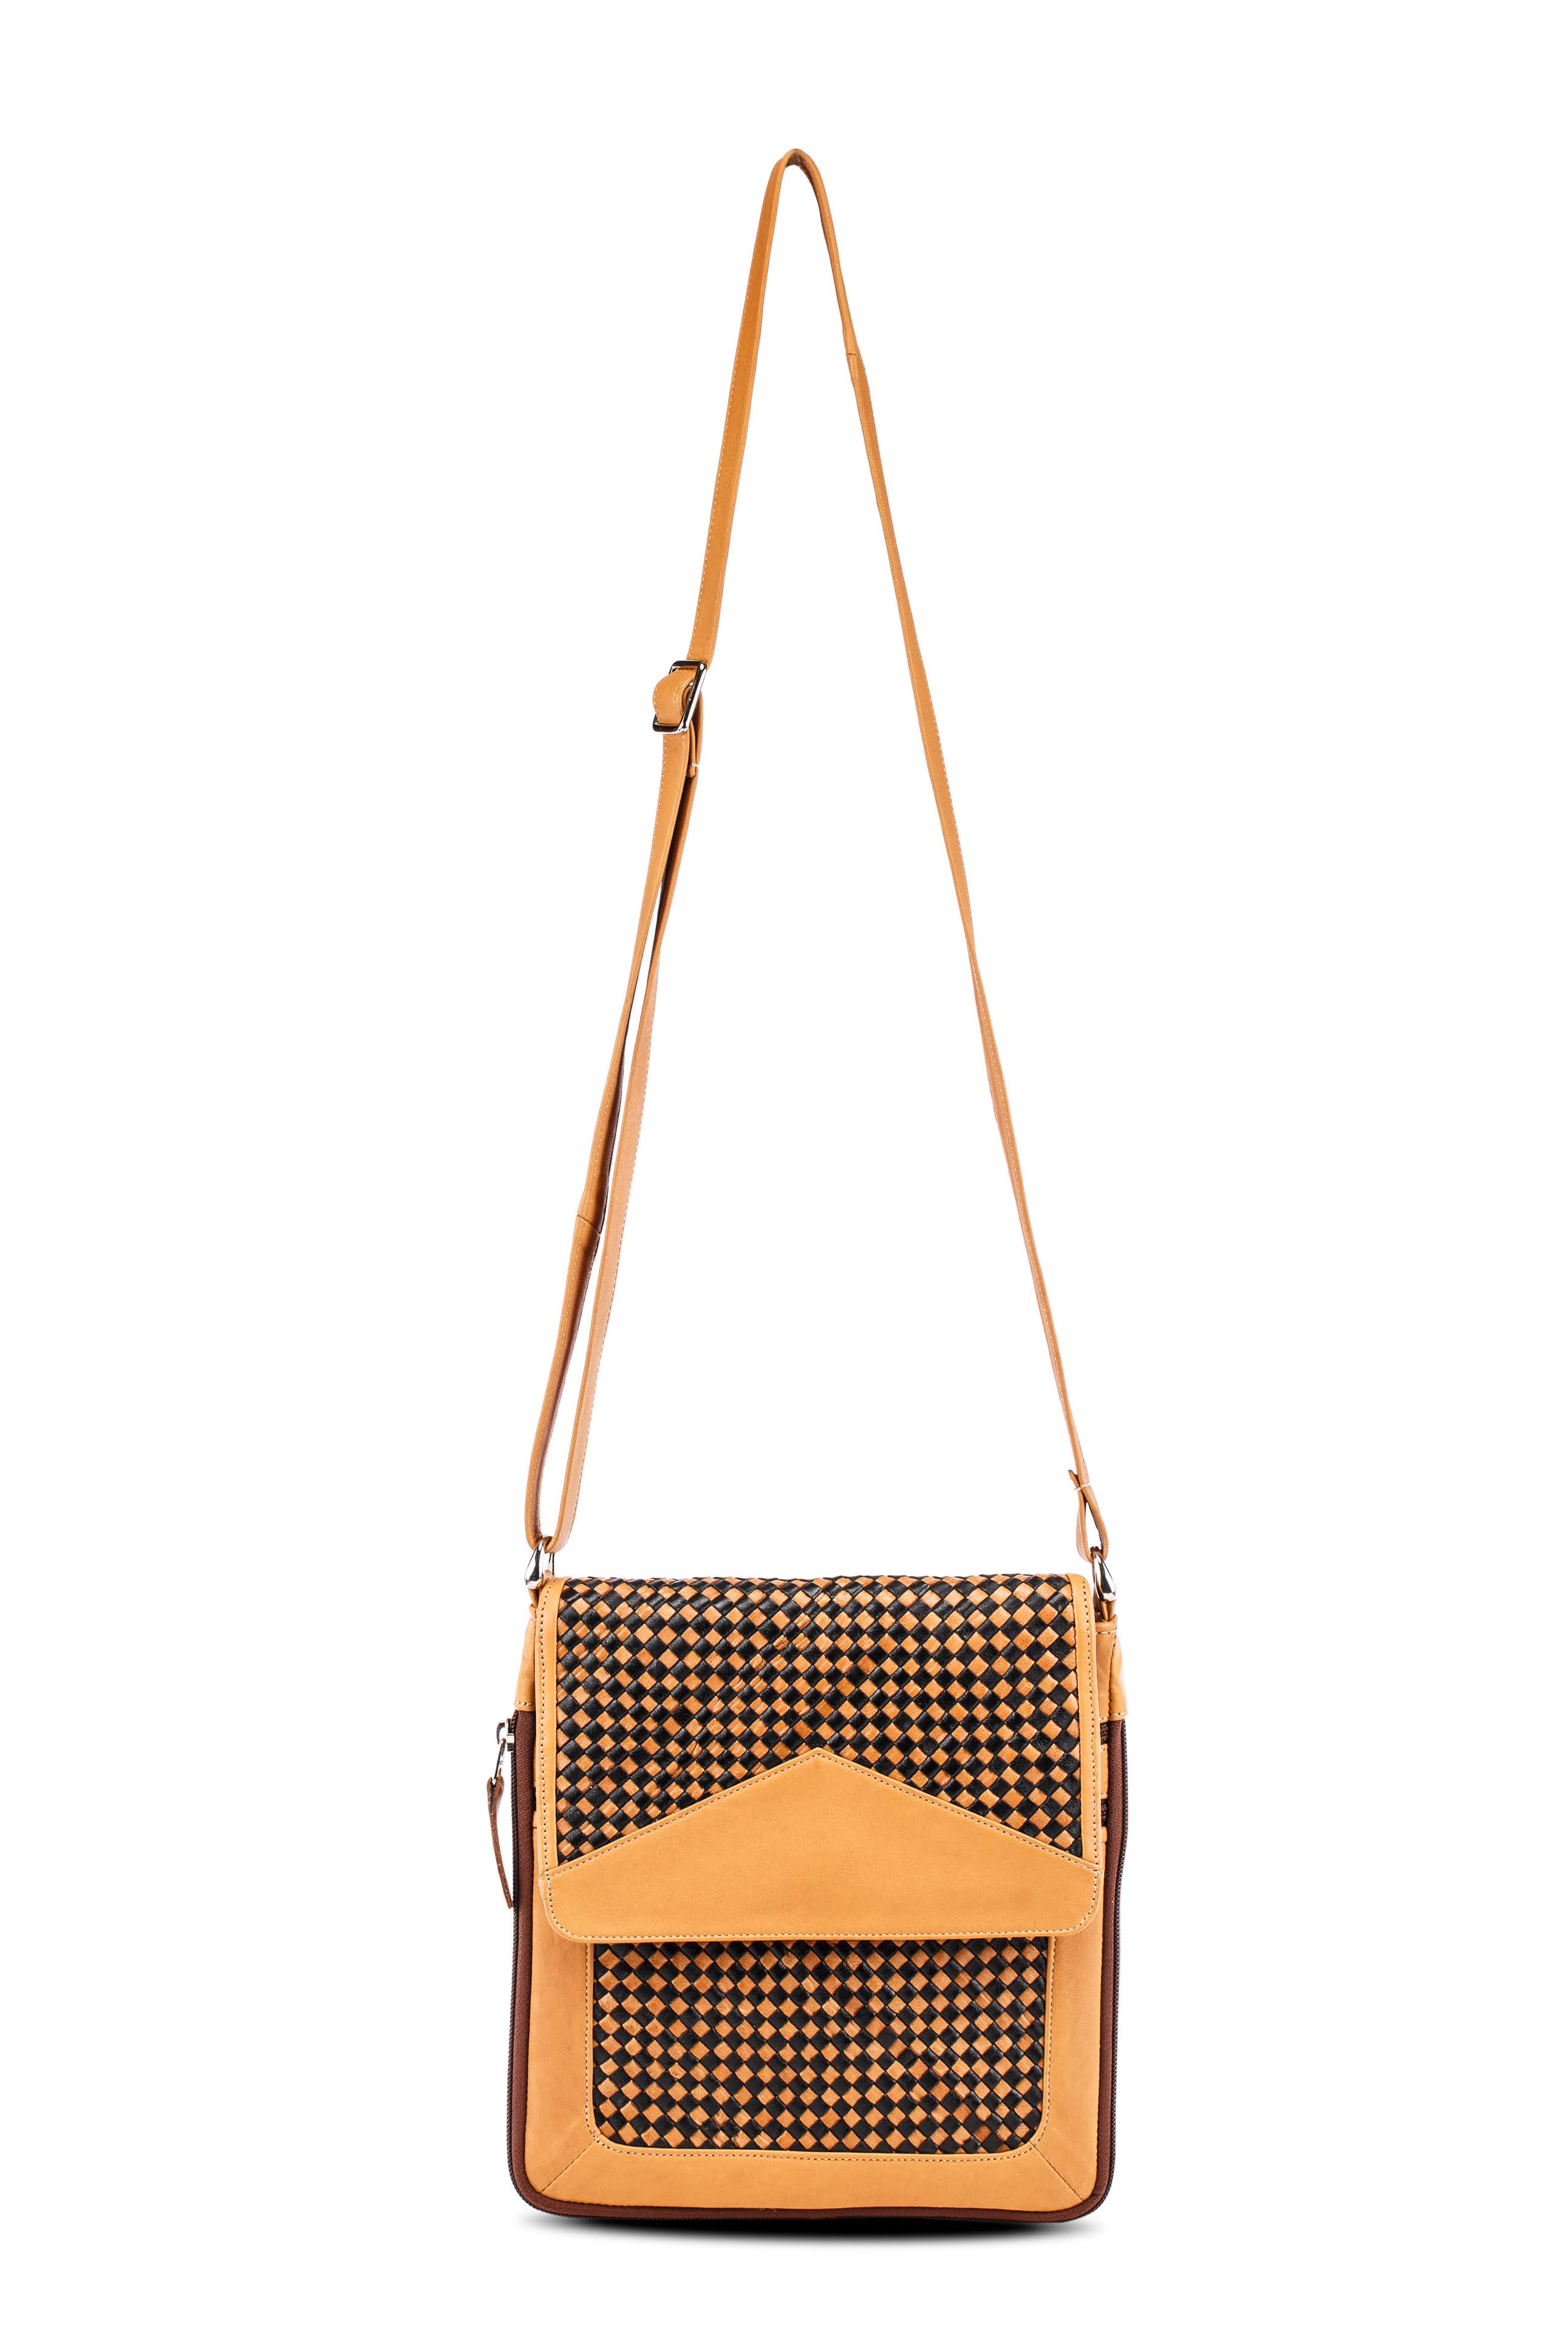 Knitted Leather Cross Body Bag Black and Tan